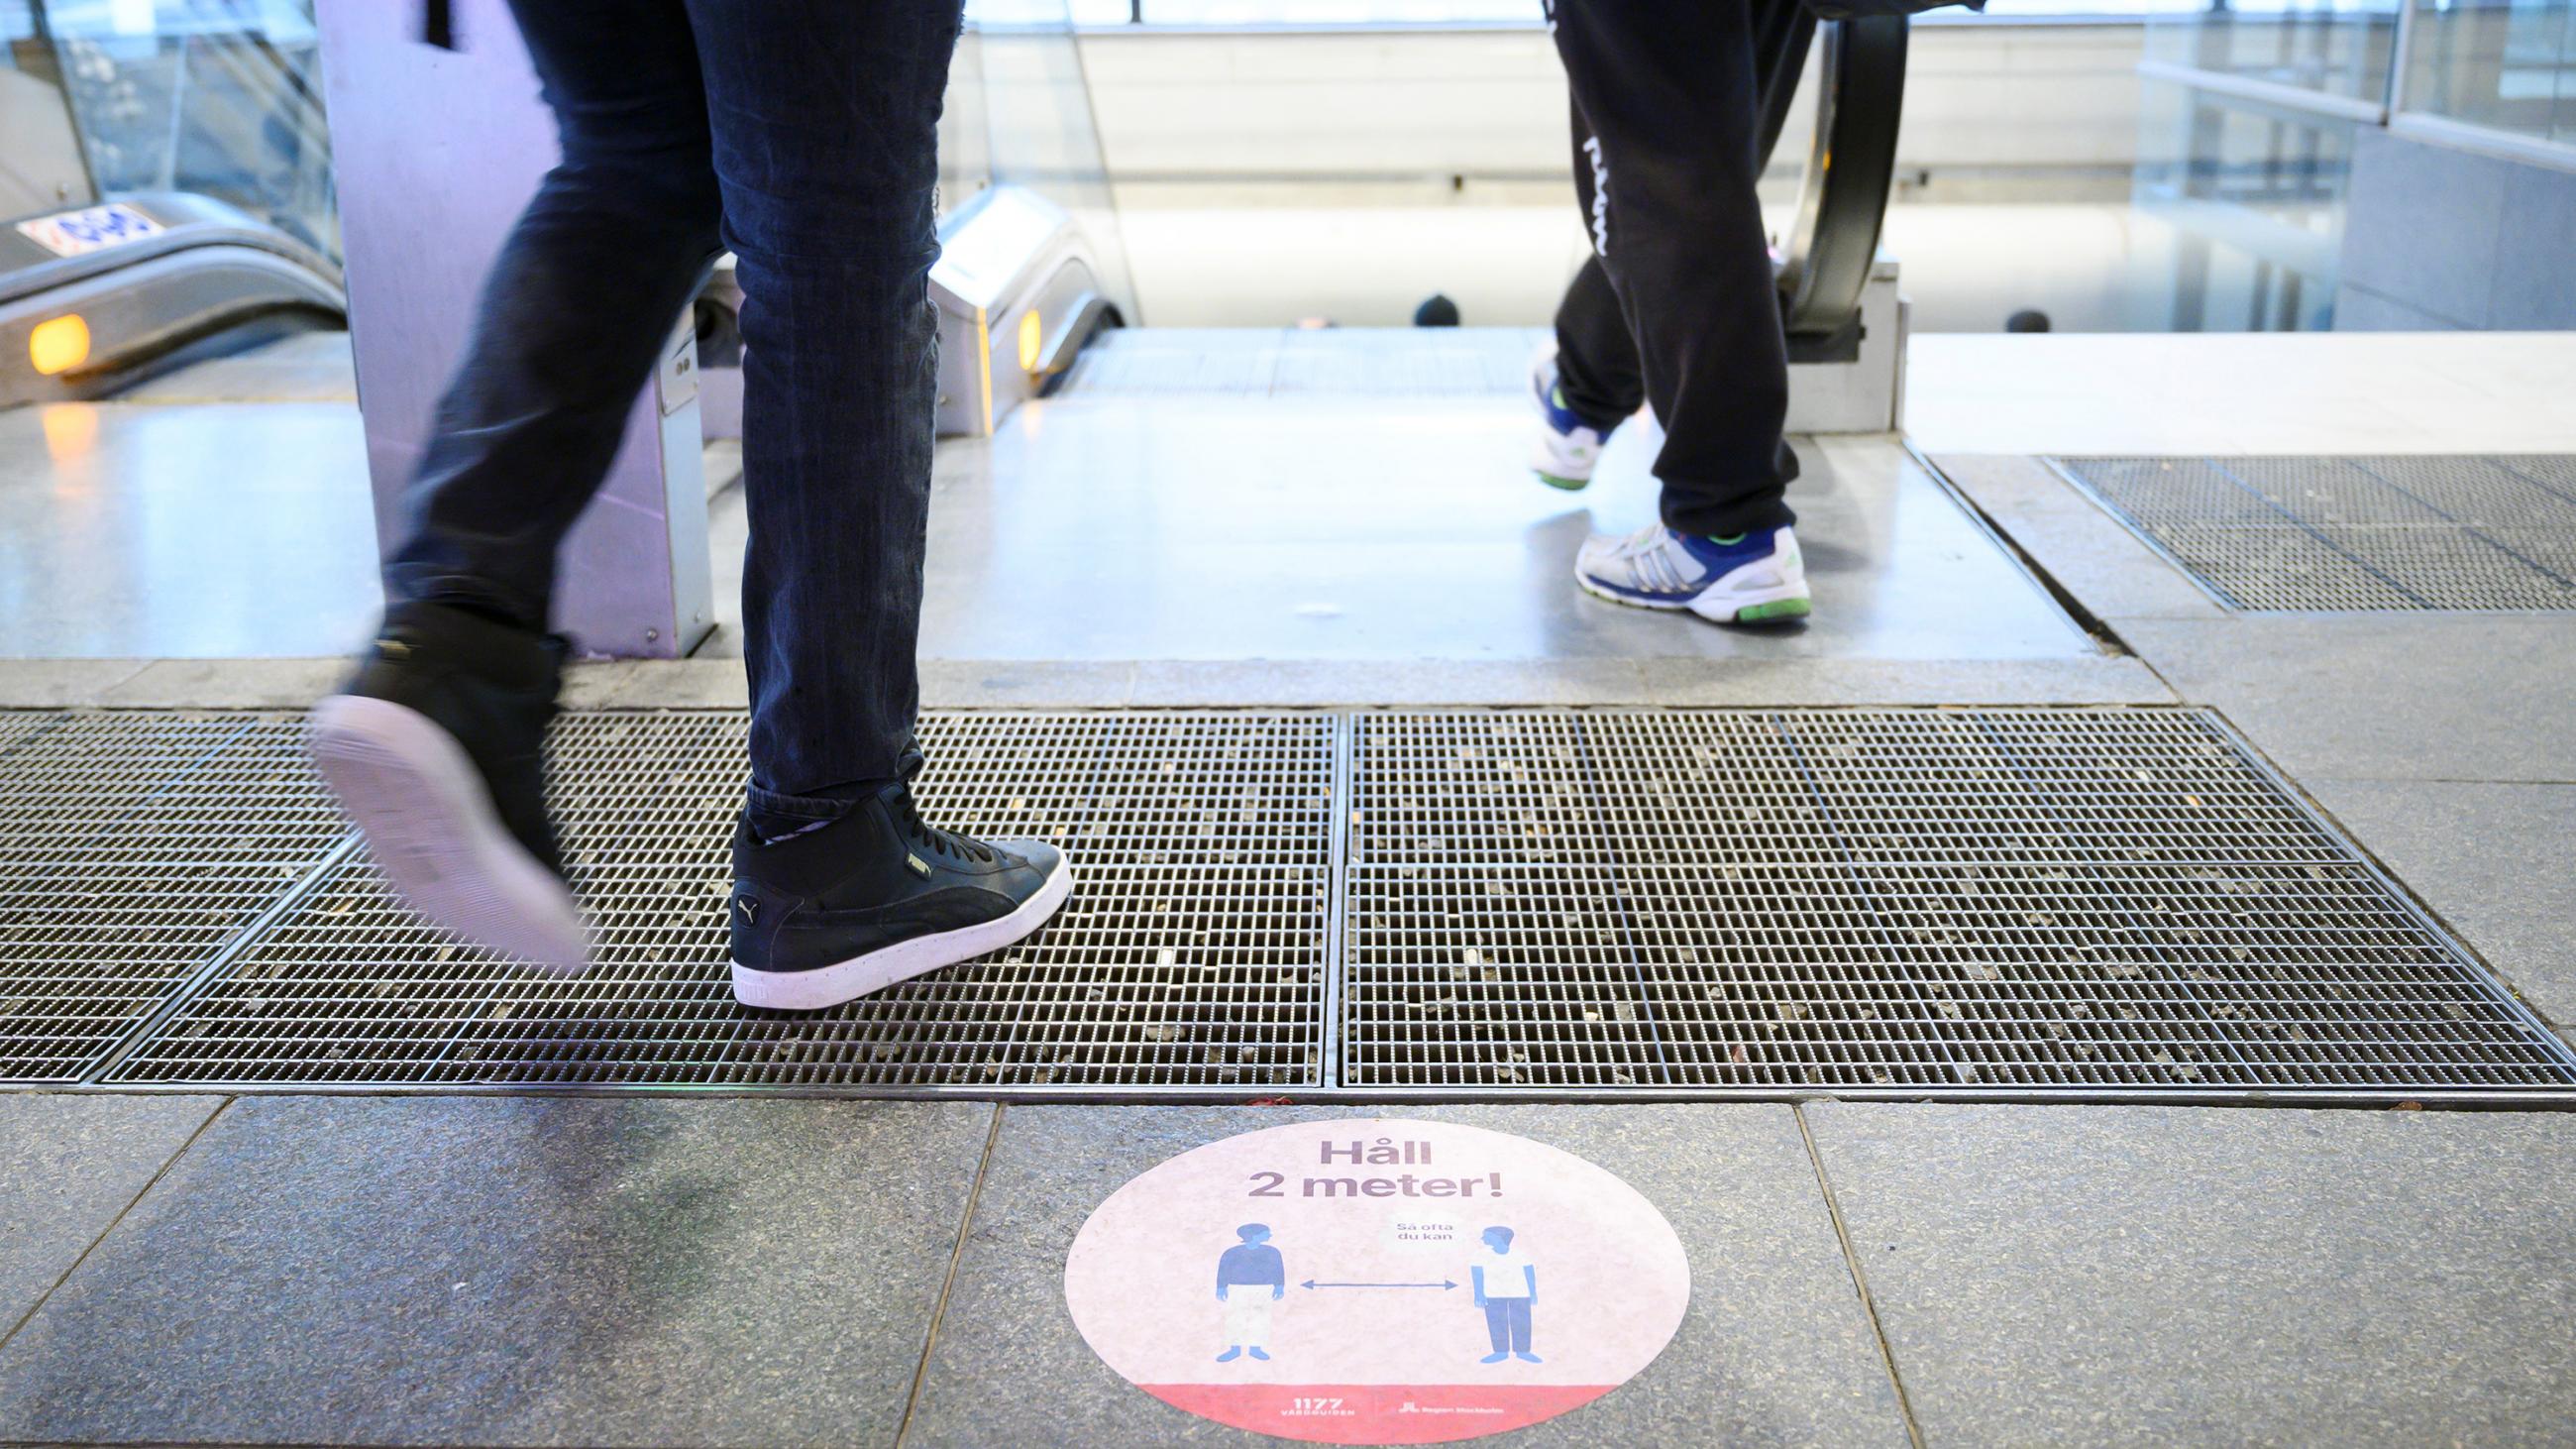 The photo shows feet walking onto an escalator above a sign warning of social distancing. 